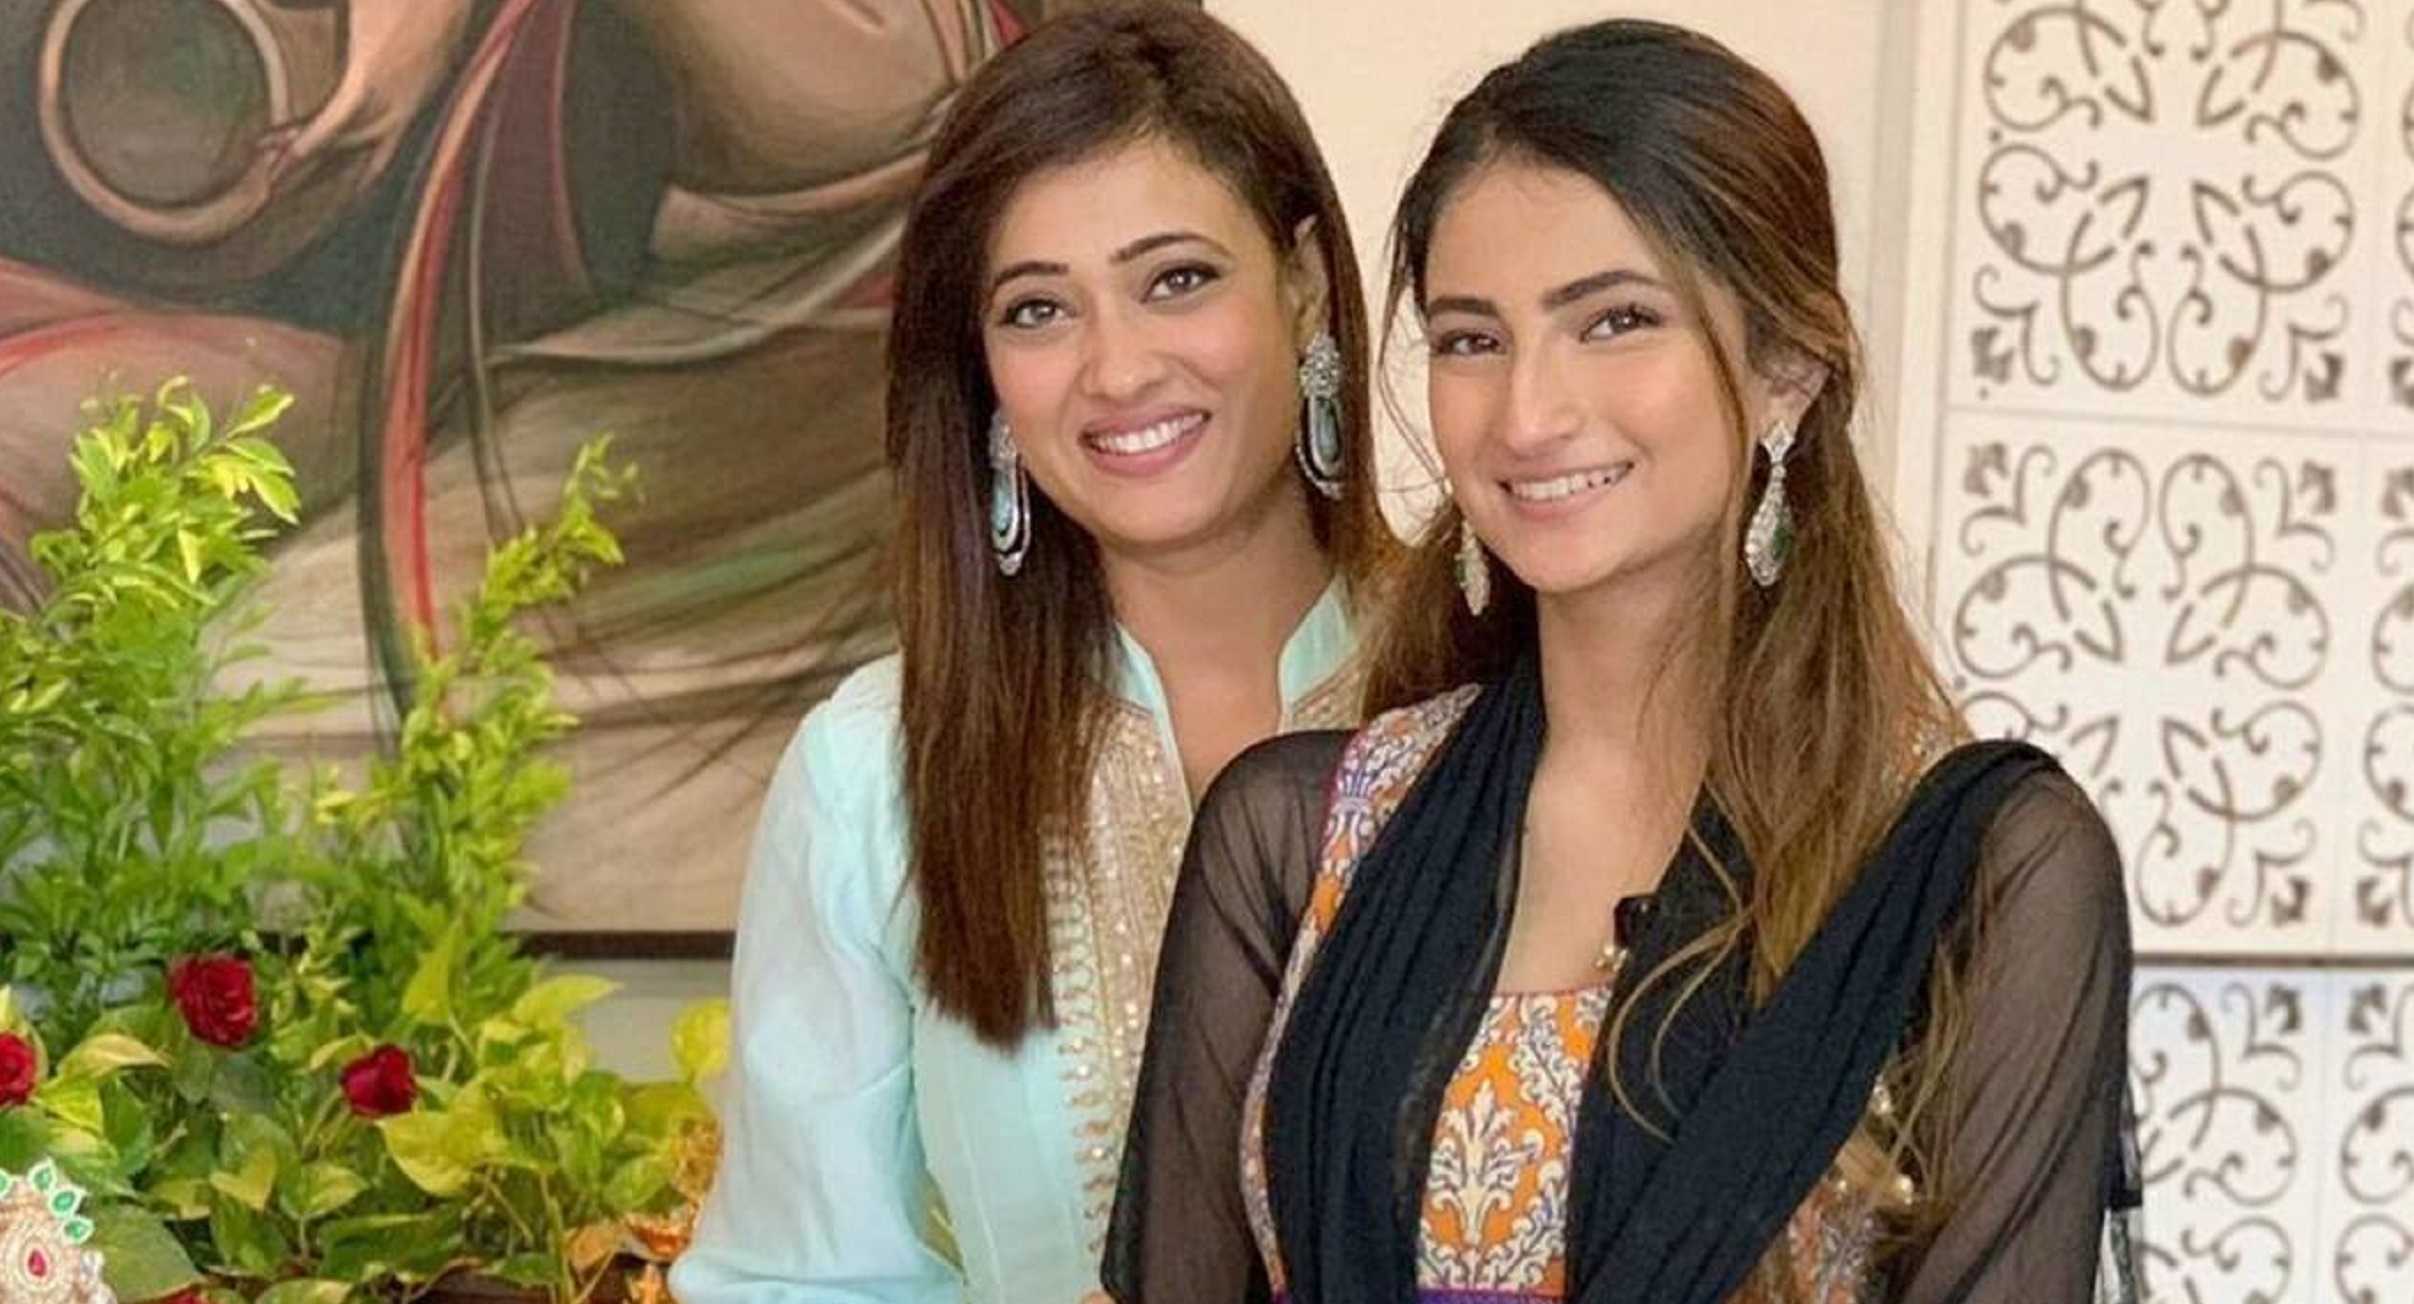 Shweta Tiwari Says She Has Advised Her Daughter Palak To Not Marry, “I don’t believe in the institution of marriage”